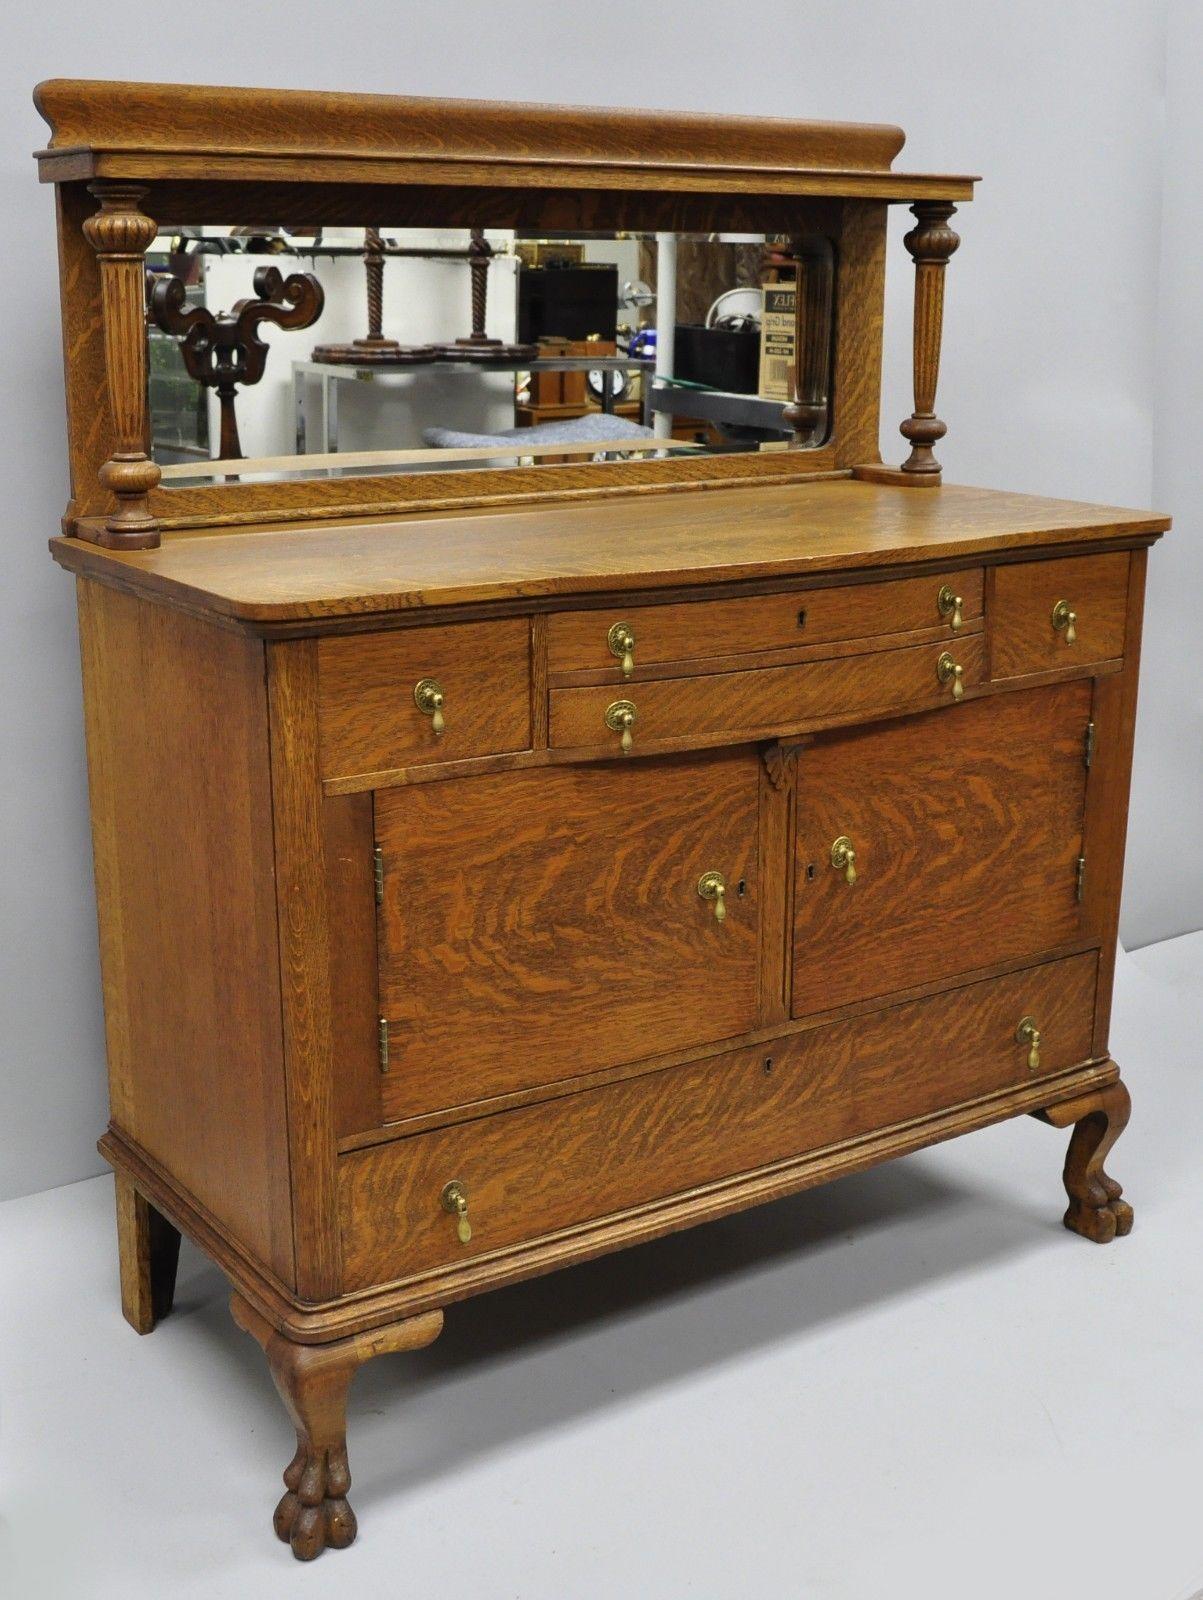 Antique Quartersawn golden oak paw foot sideboard with mirrored backsplash. Item features carved paw feet, bow front, beautiful woodgrain, two swing doors, no key but unlocked, bevelled glass mirror, five dovetailed drawers, circa